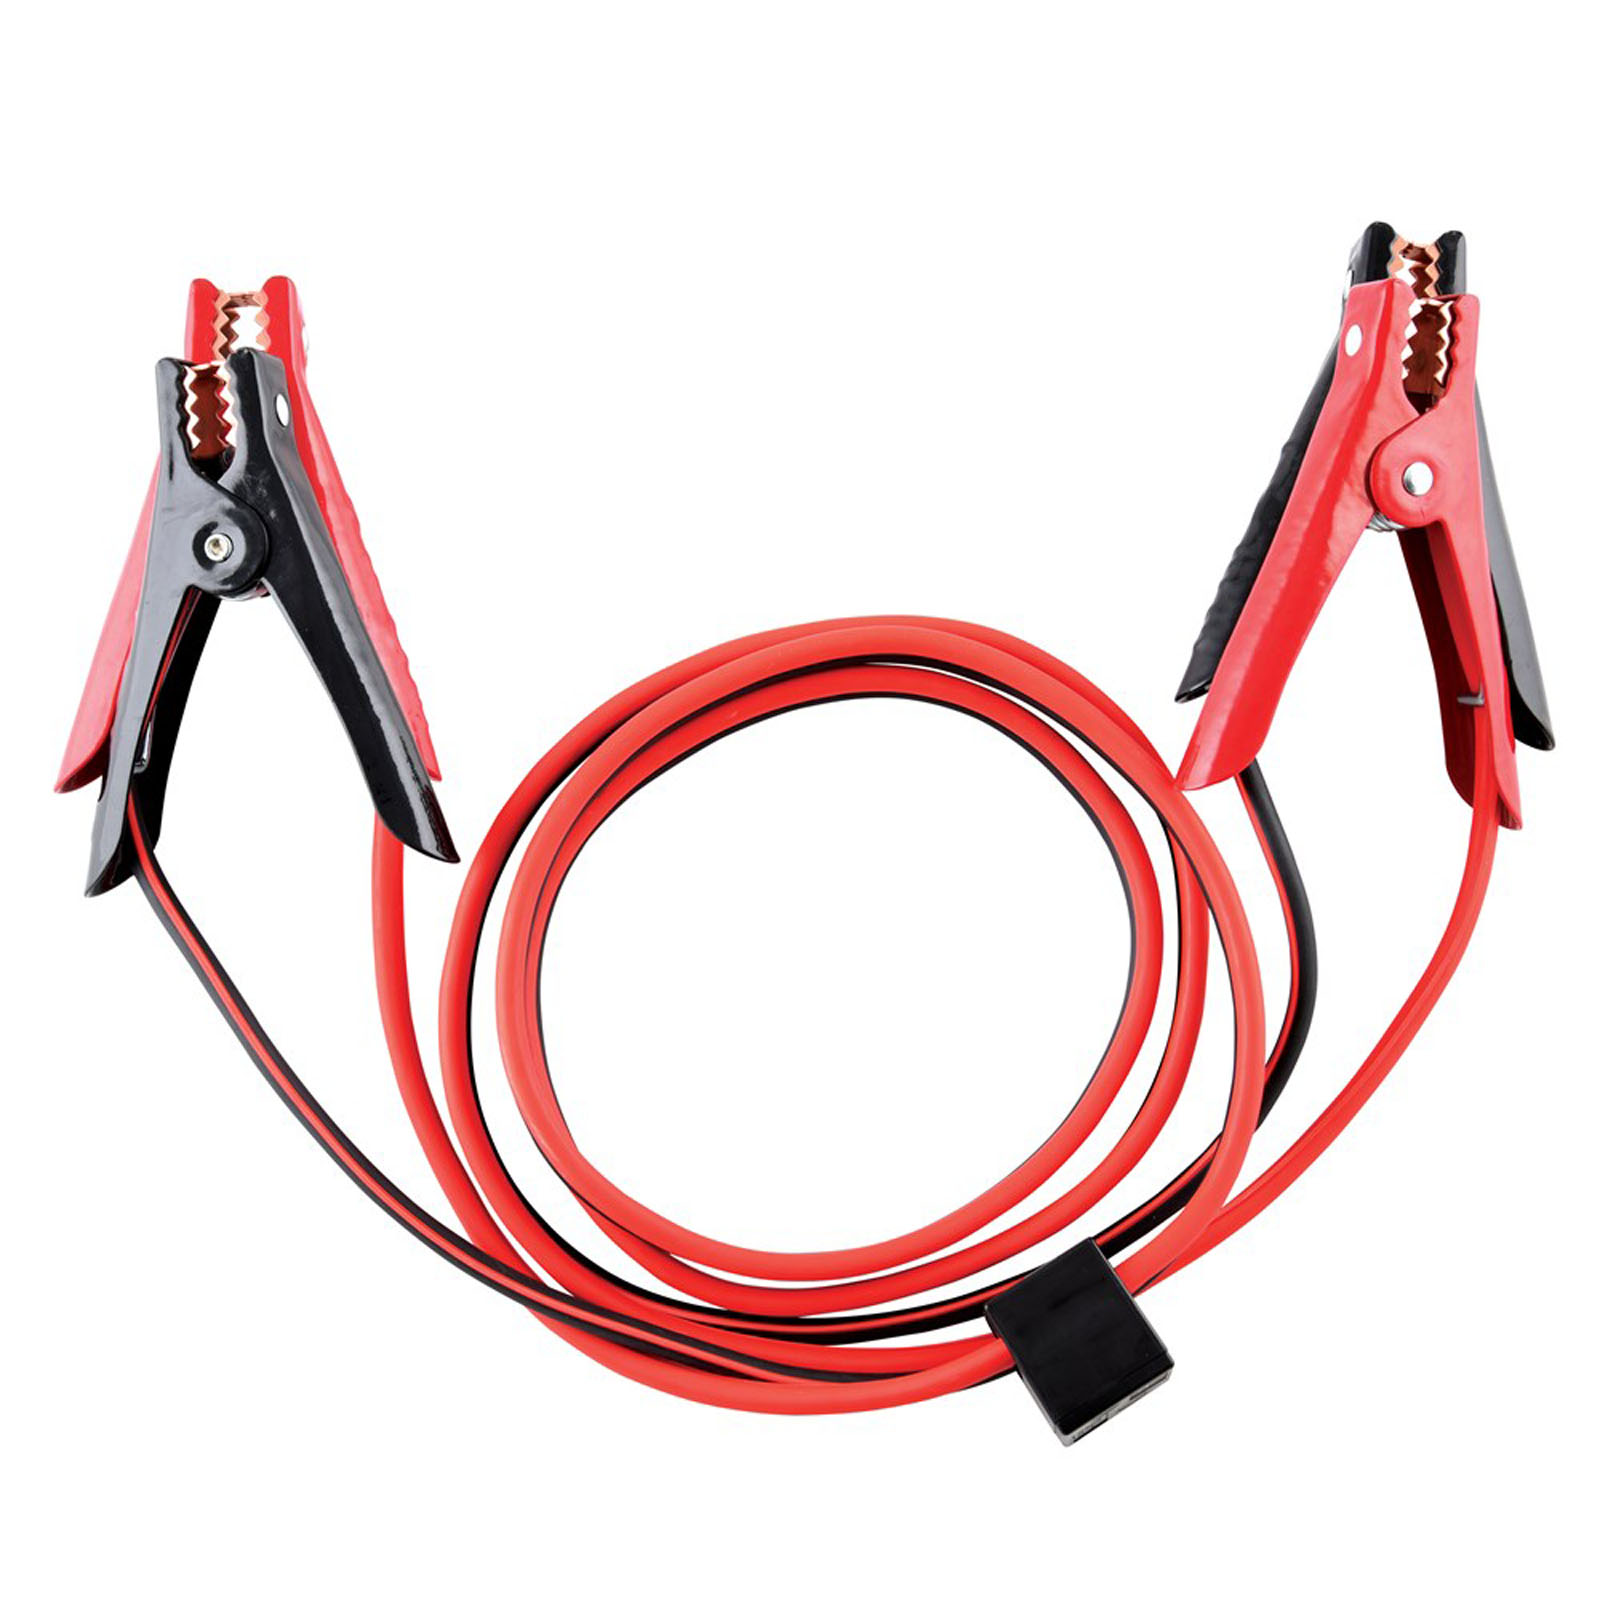 Standard Booster Cables 200 AMP 